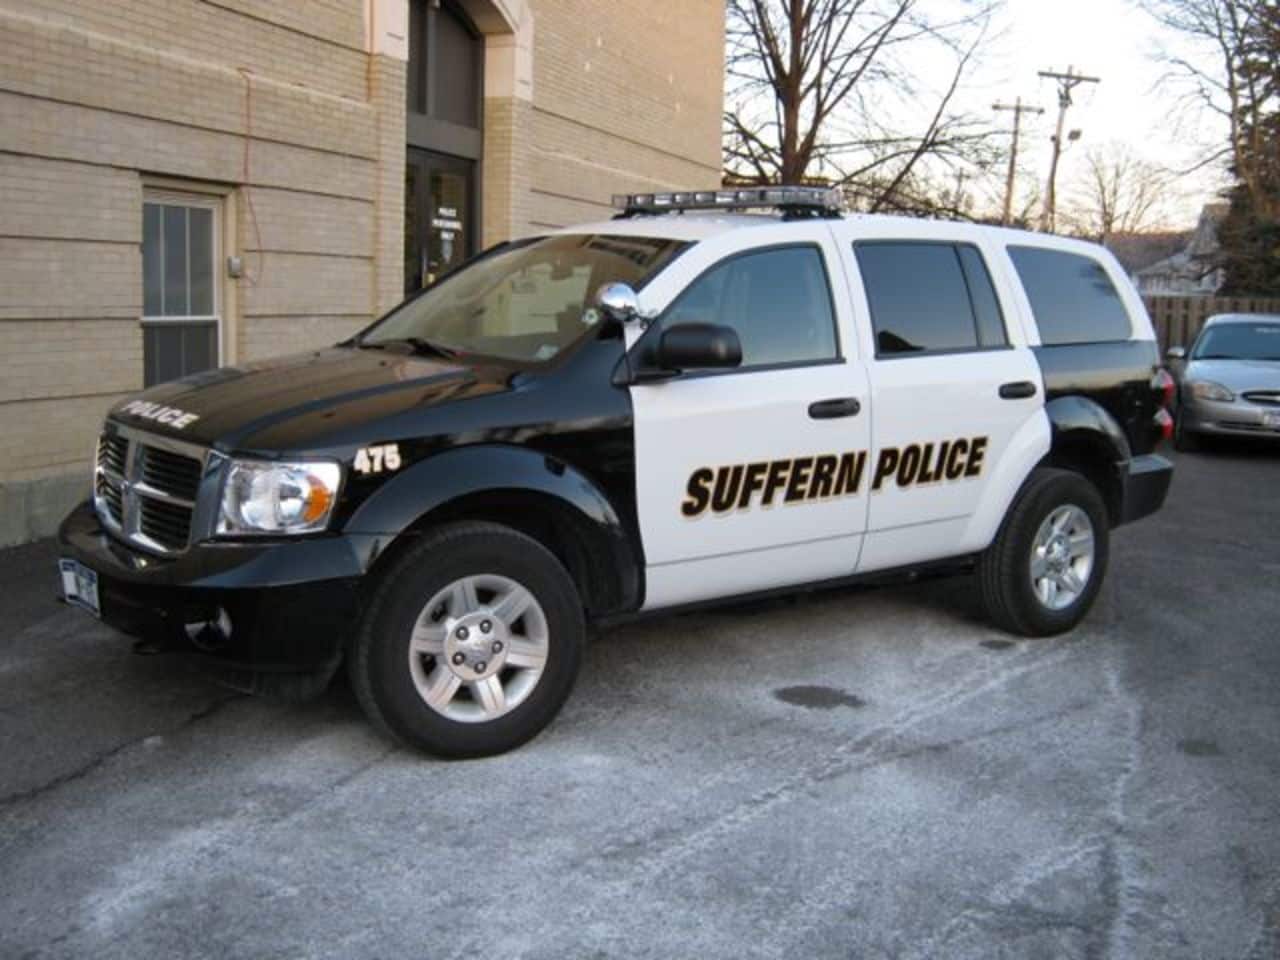 Suffern police arrested a man on criminal contempt charges after a domestic dispute on Friday morning.